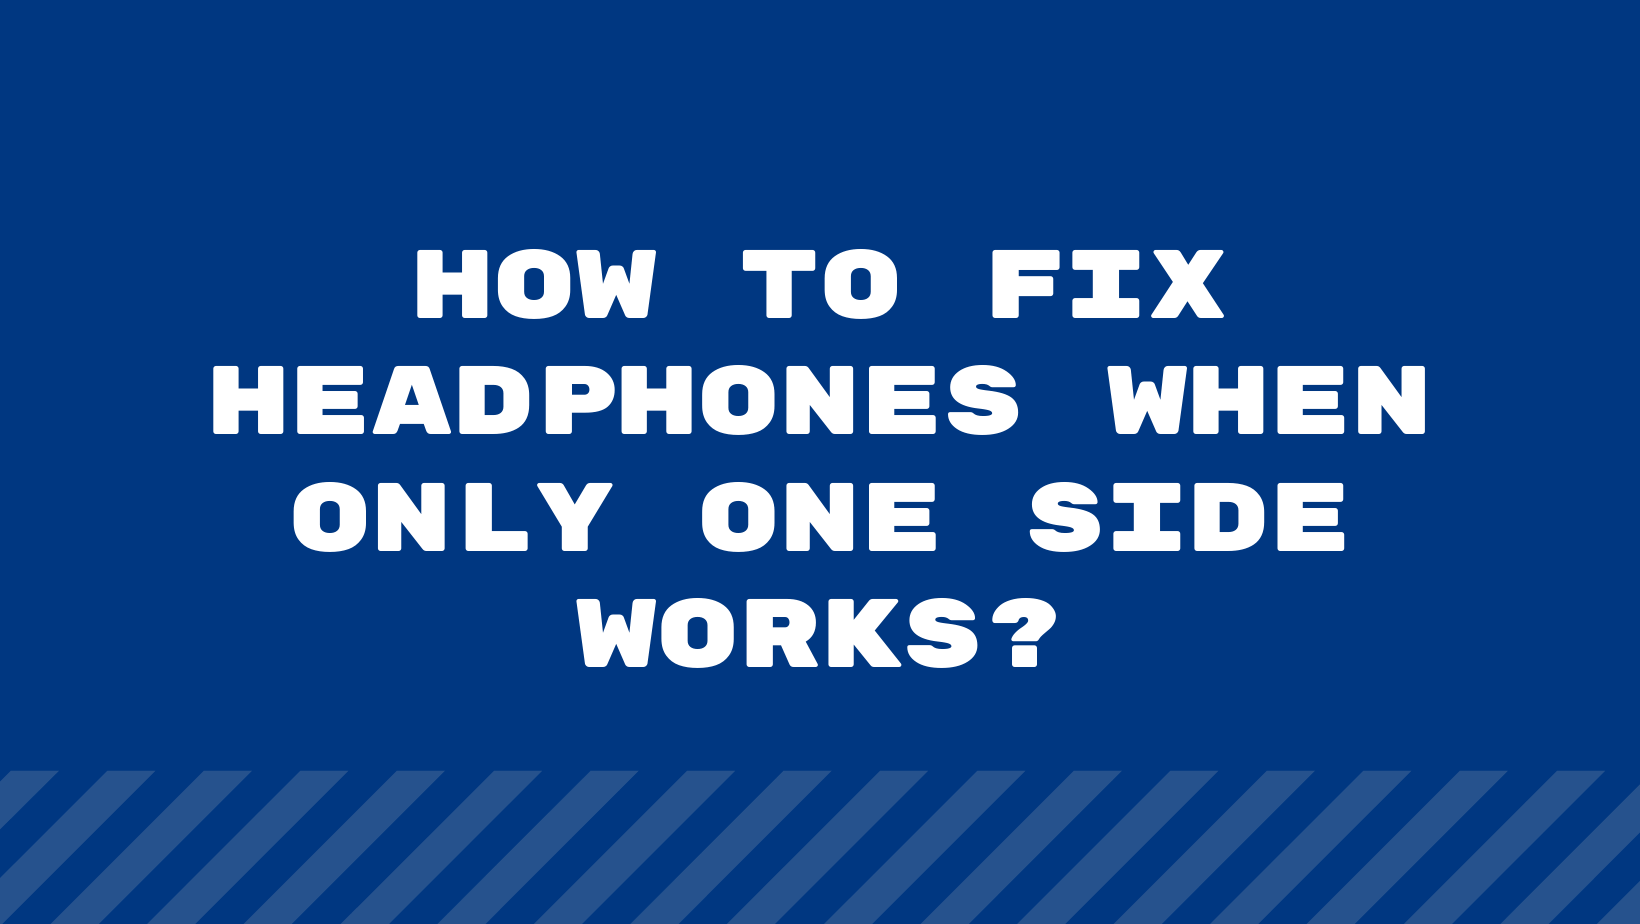 How to Fix Headphones When Only One Side Works